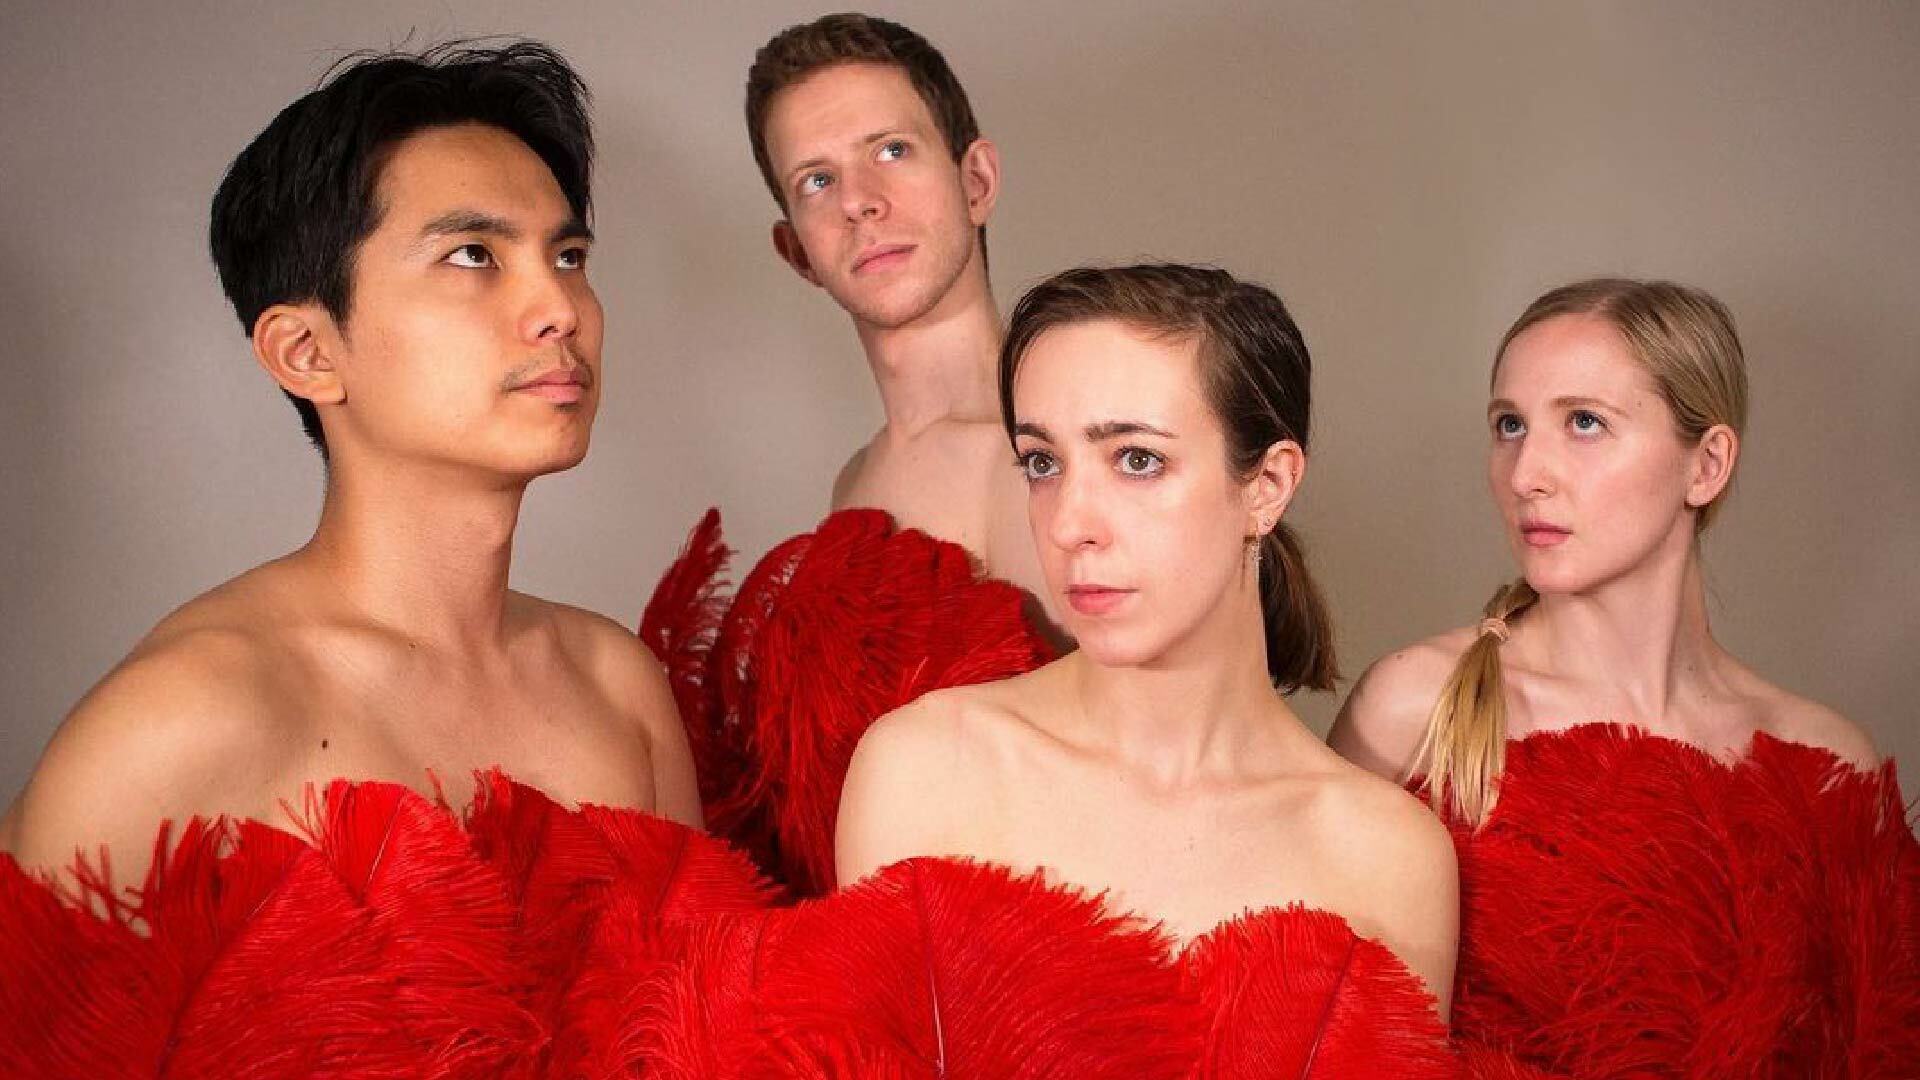 Four people covered in large, red feathers